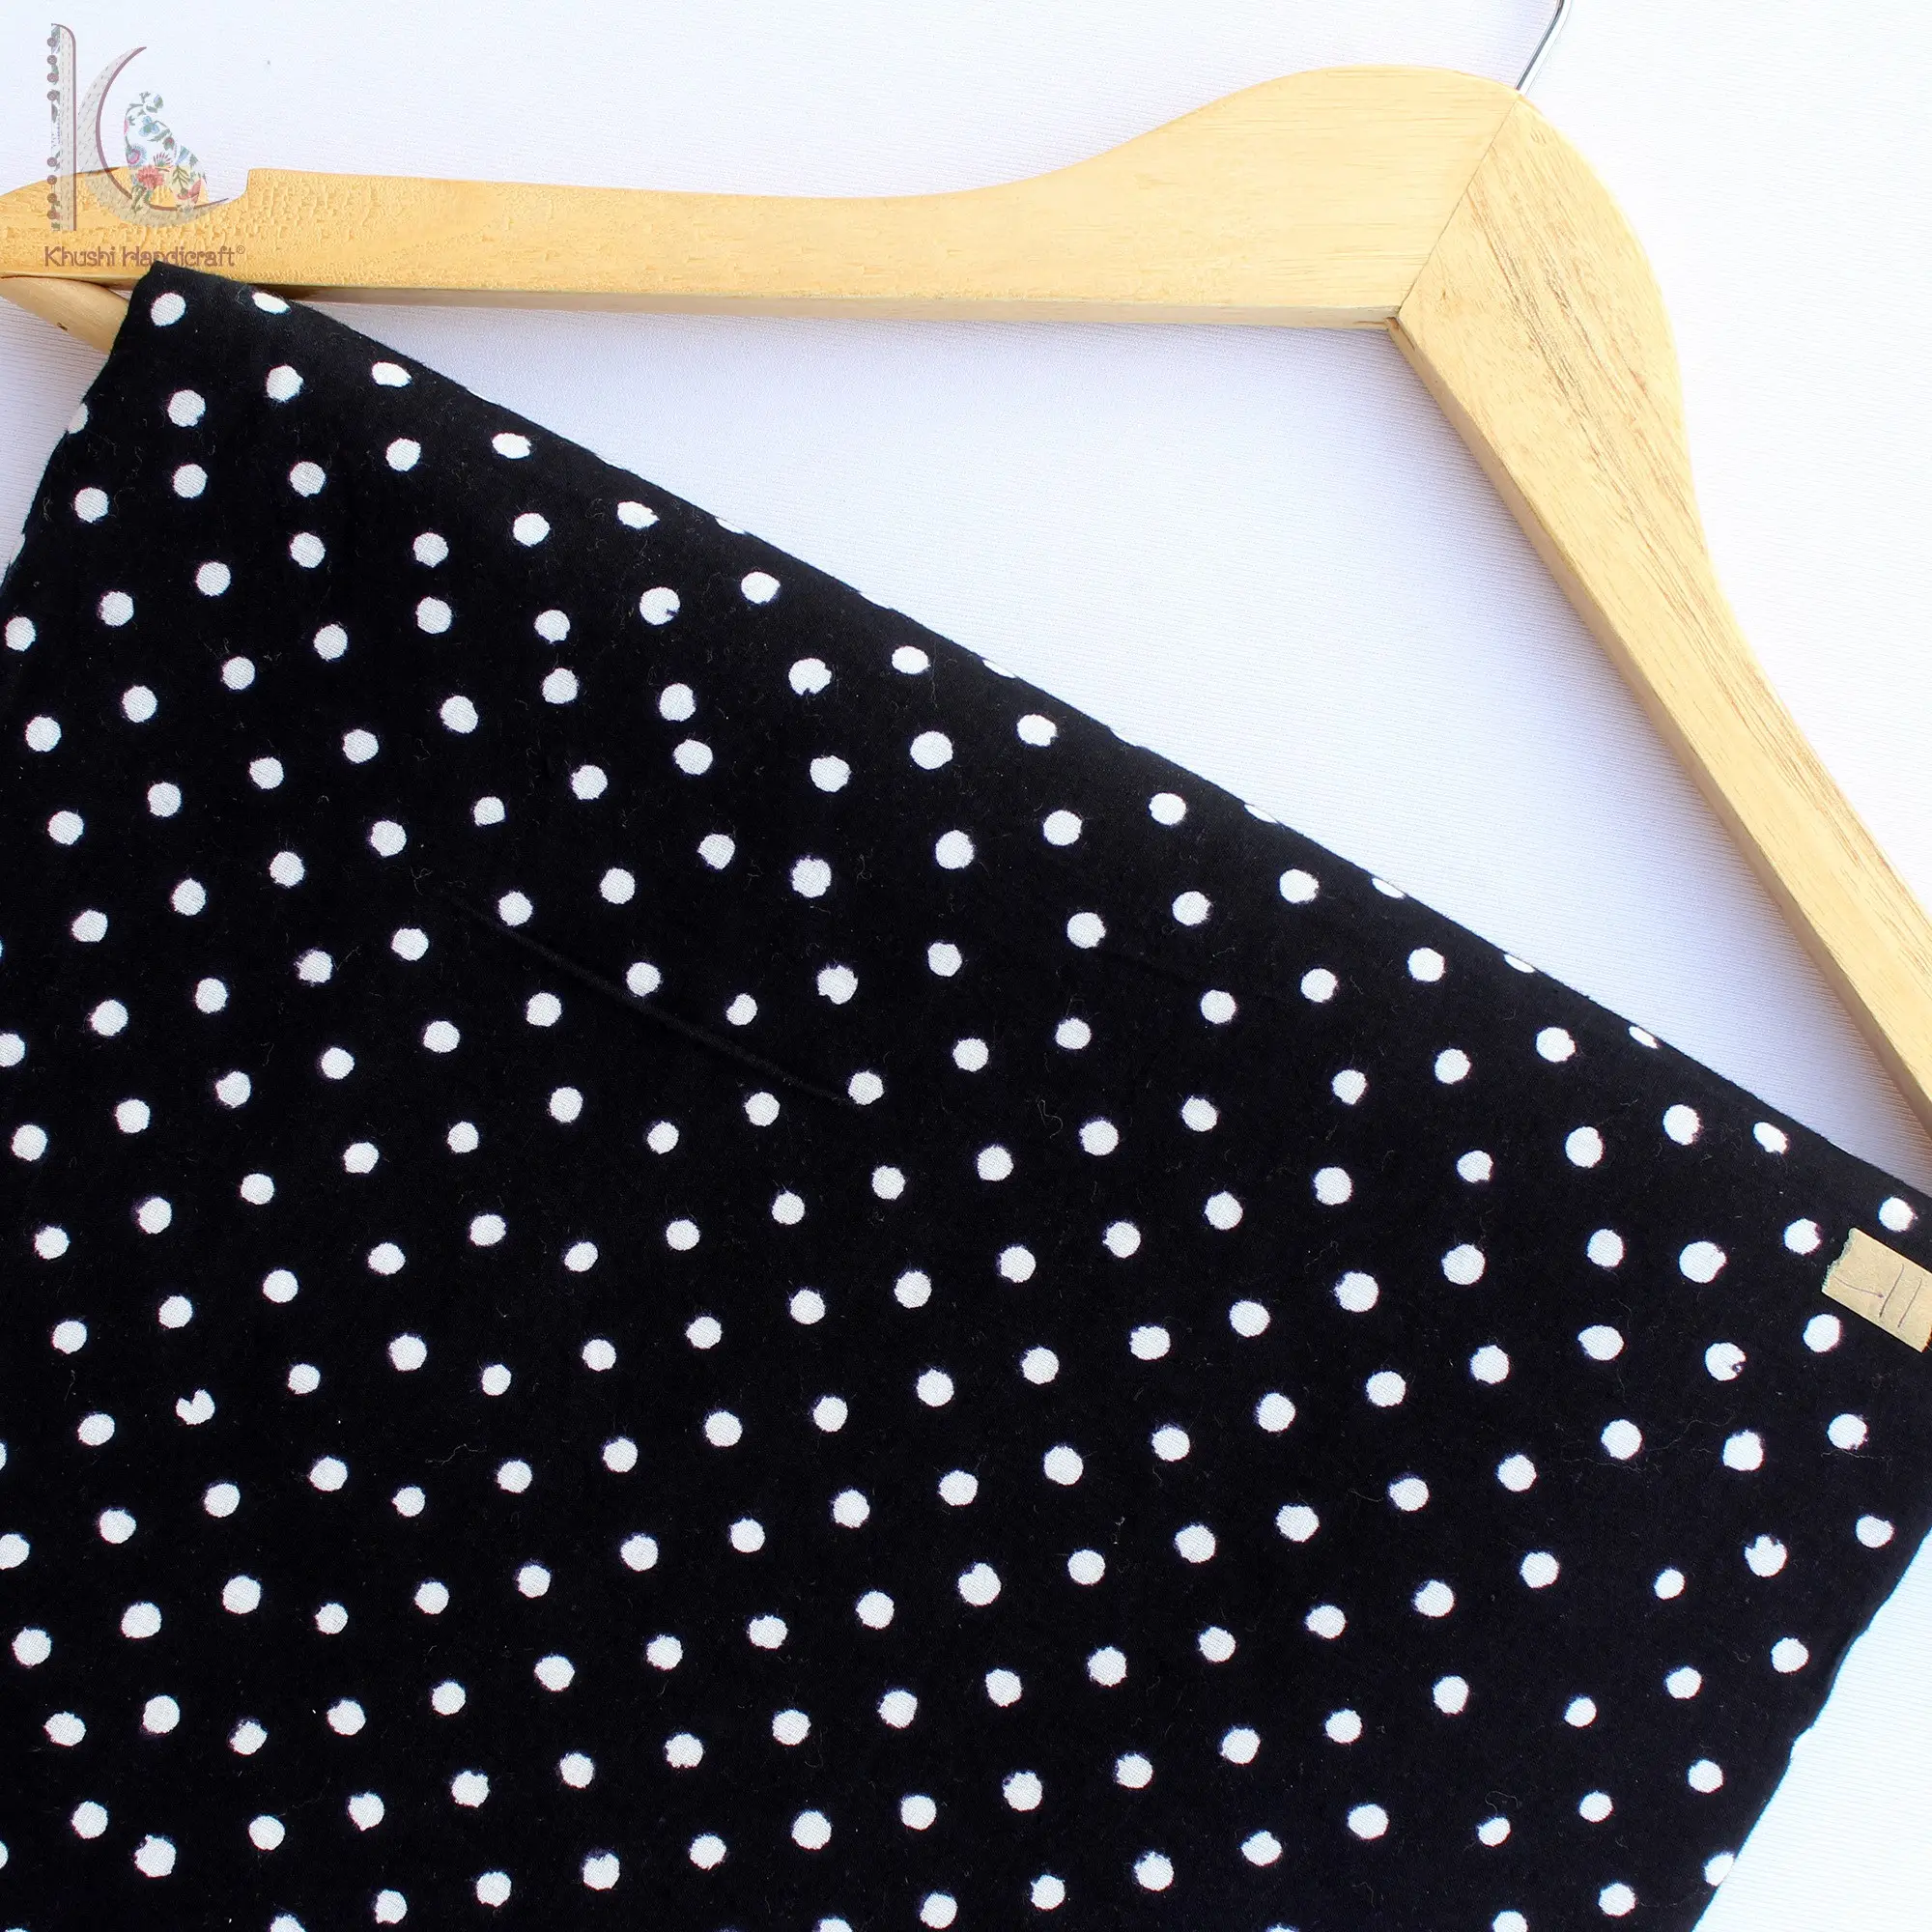 Indian Customized Manufacturer Beautiful Black Color Polka Dot Hand Block Voile Original Cotton Fabric For Sewing Dress